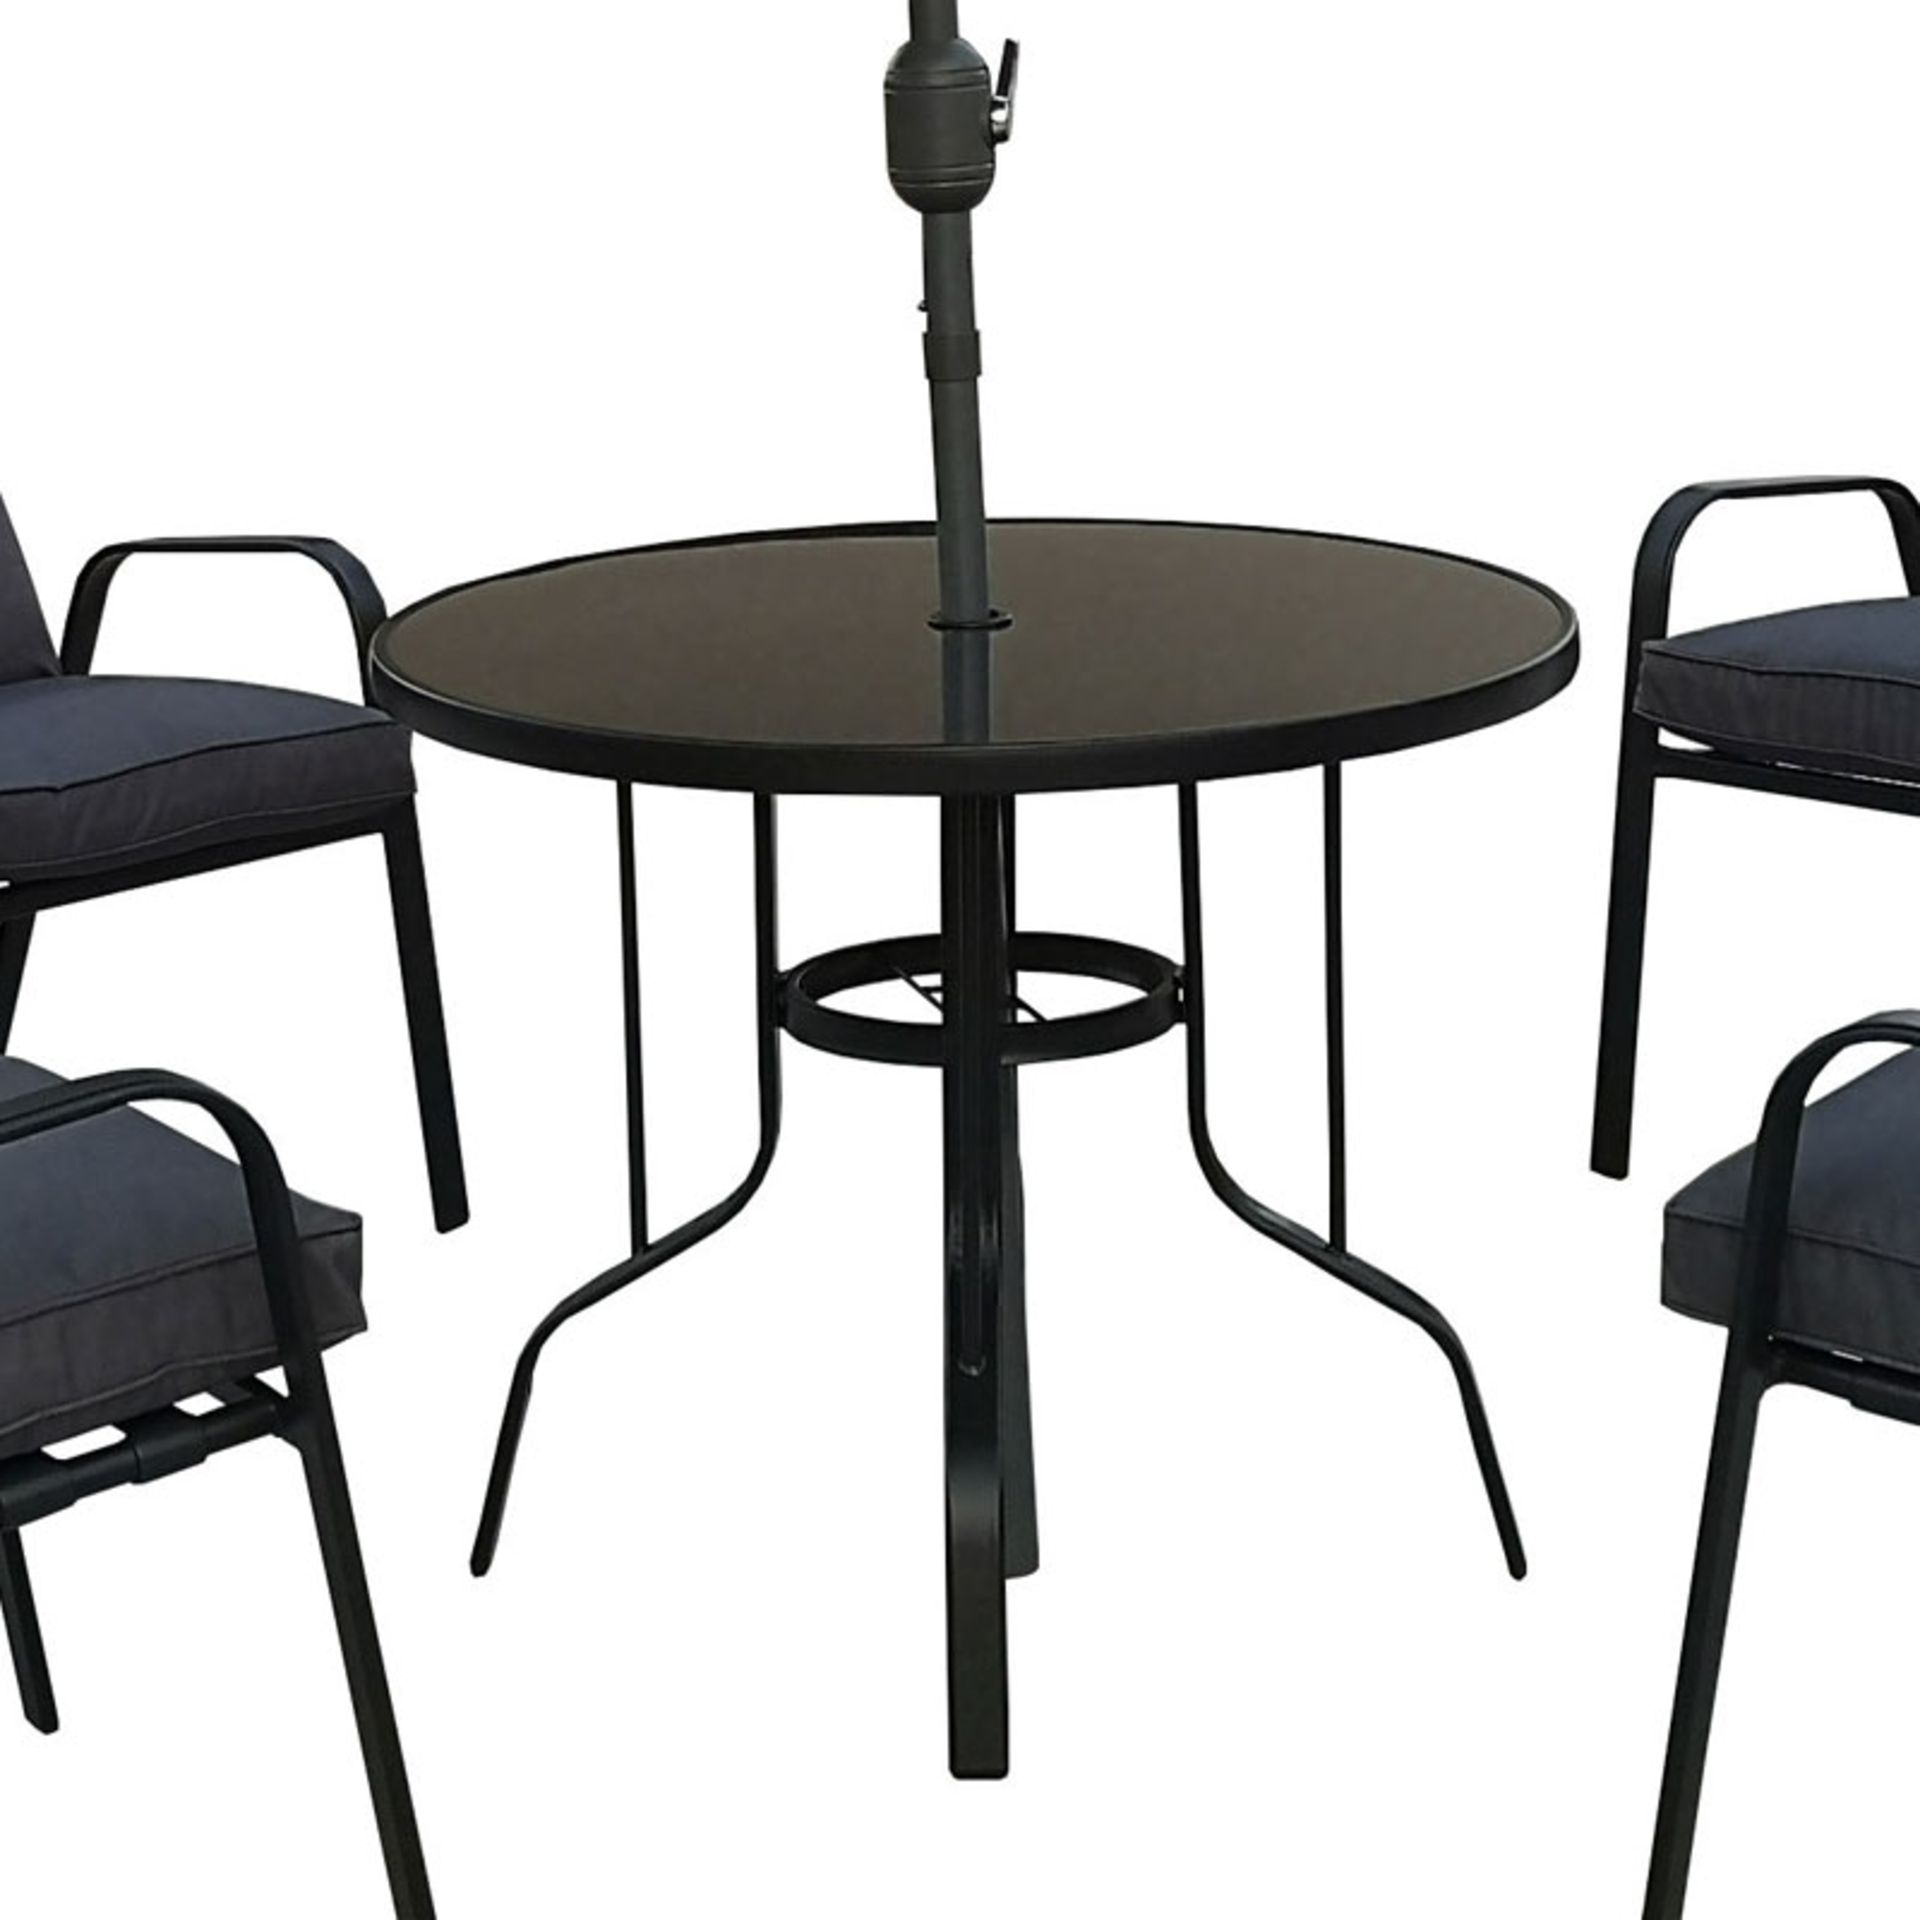 Malvern 4 Seater Dining Set With Parasol - Image 2 of 3